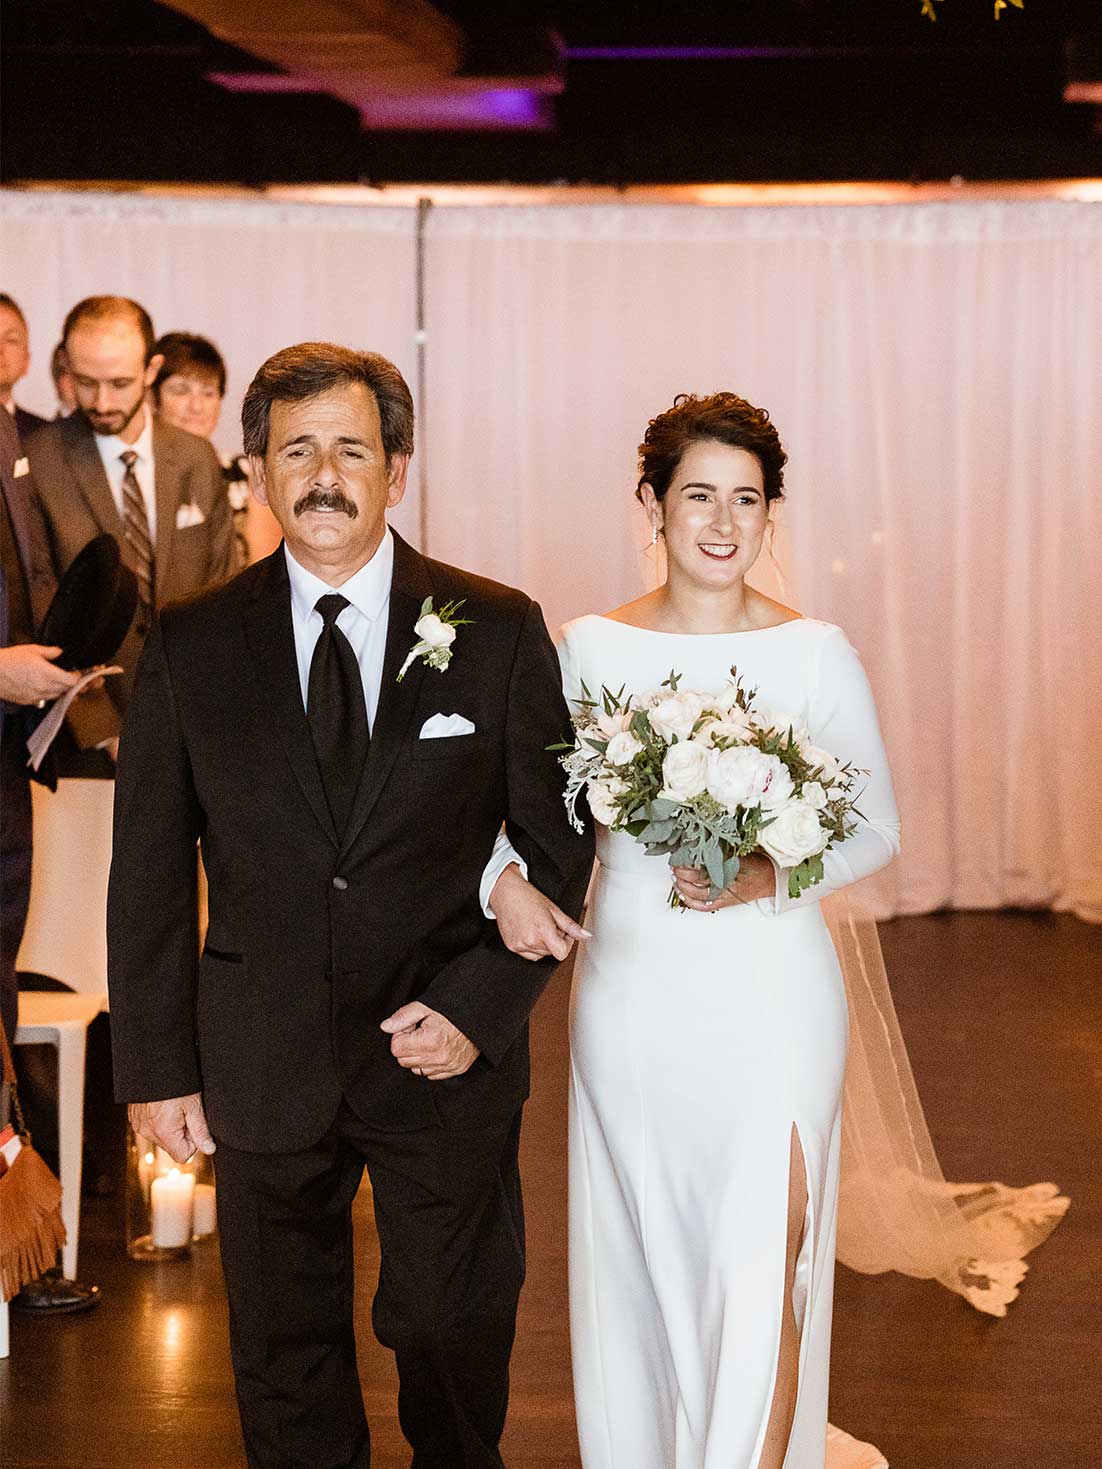 Smiling bride is escorted down the ceremony aisle by her father